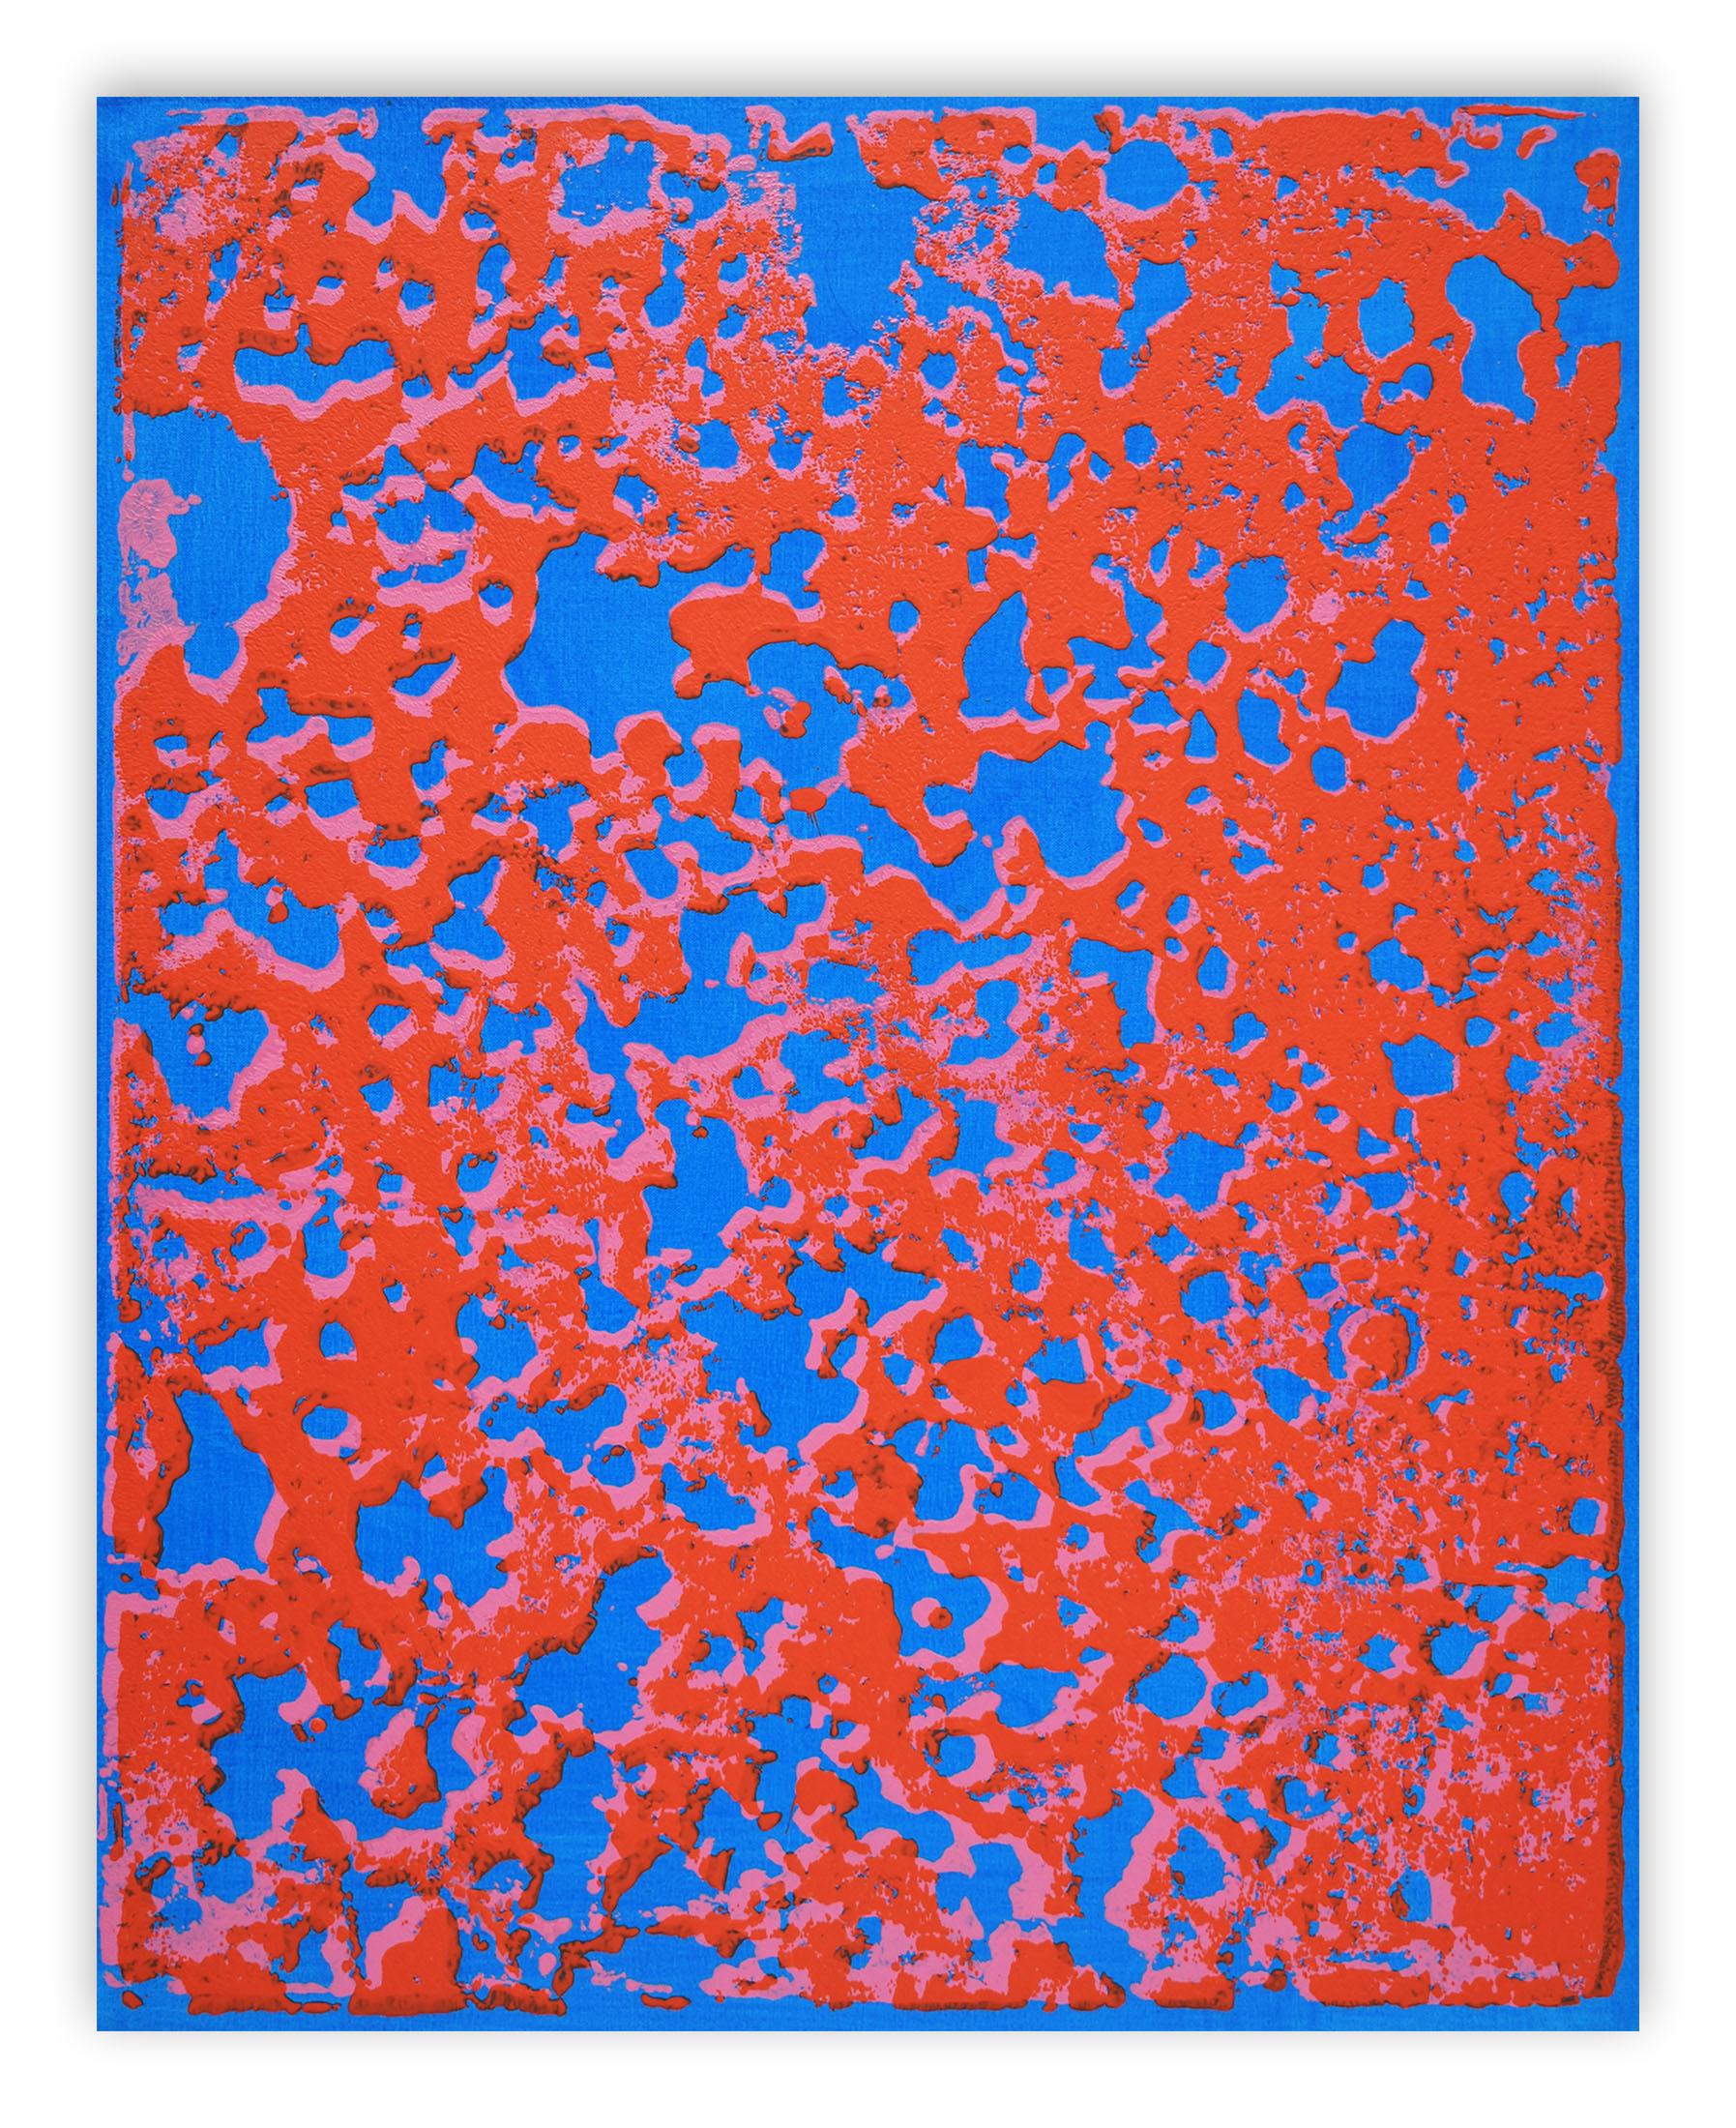 P19-0616 (Abstract Painting)

Acrylic on canvas - Unframed.

In a process closely akin to relief printmaking, Maine uses textured surfaces to apply fluid acrylic paint indirectly to prepared canvas. He makes these surfaces or “plates,” some of which